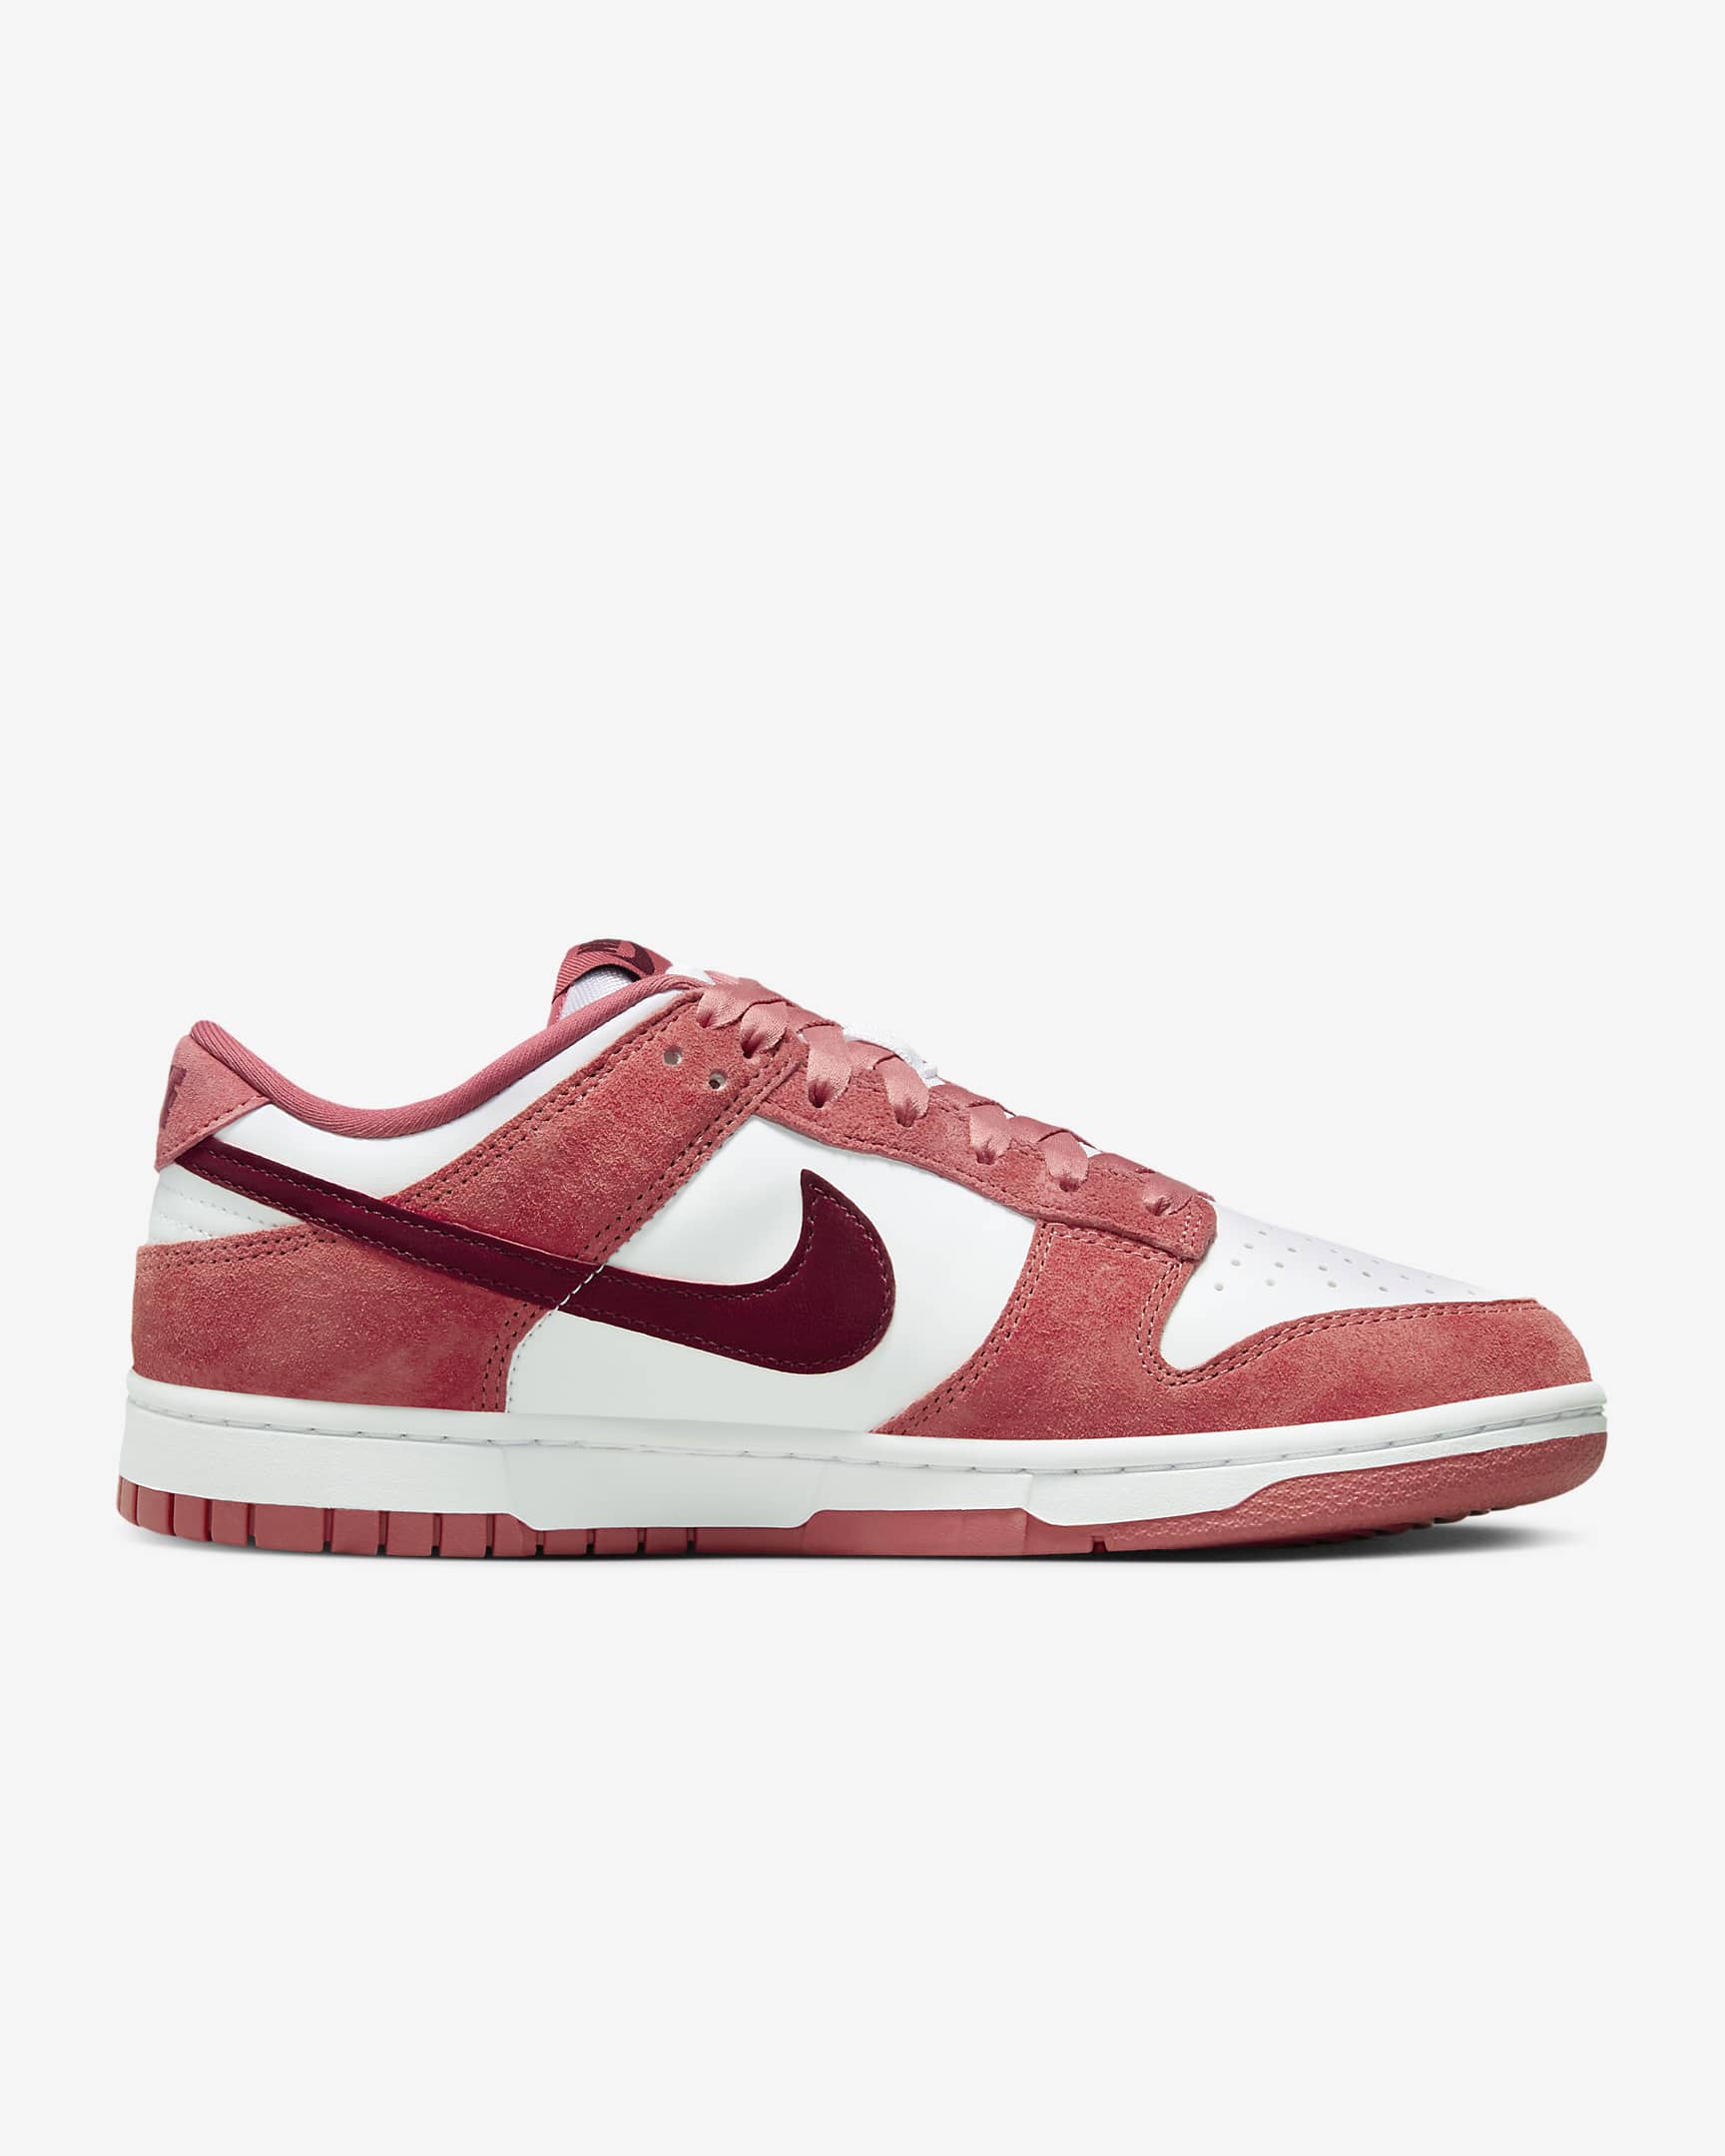 Nike Dunk Low Women's Shoes - White/Adobe/Dragon Red/Team Red